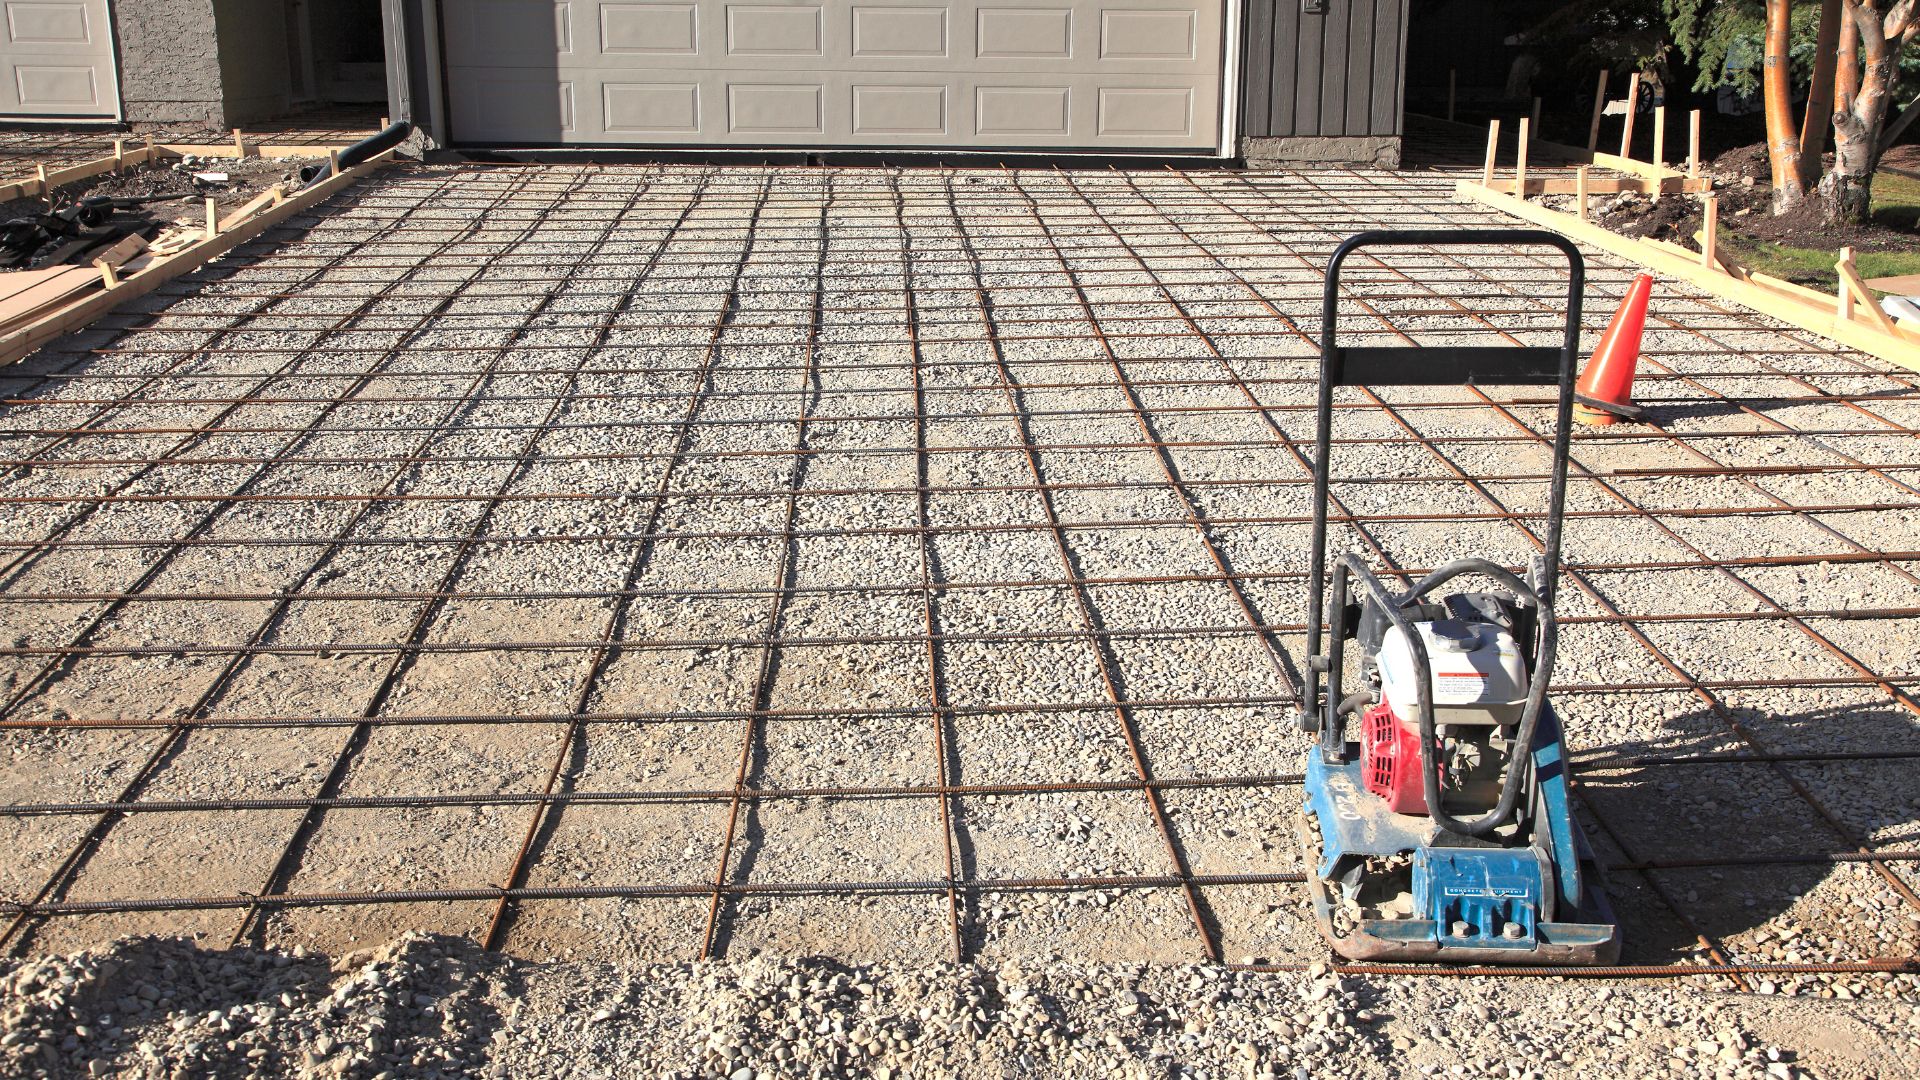 Gravel and rebar installed on a driveway ready for concrete pouring